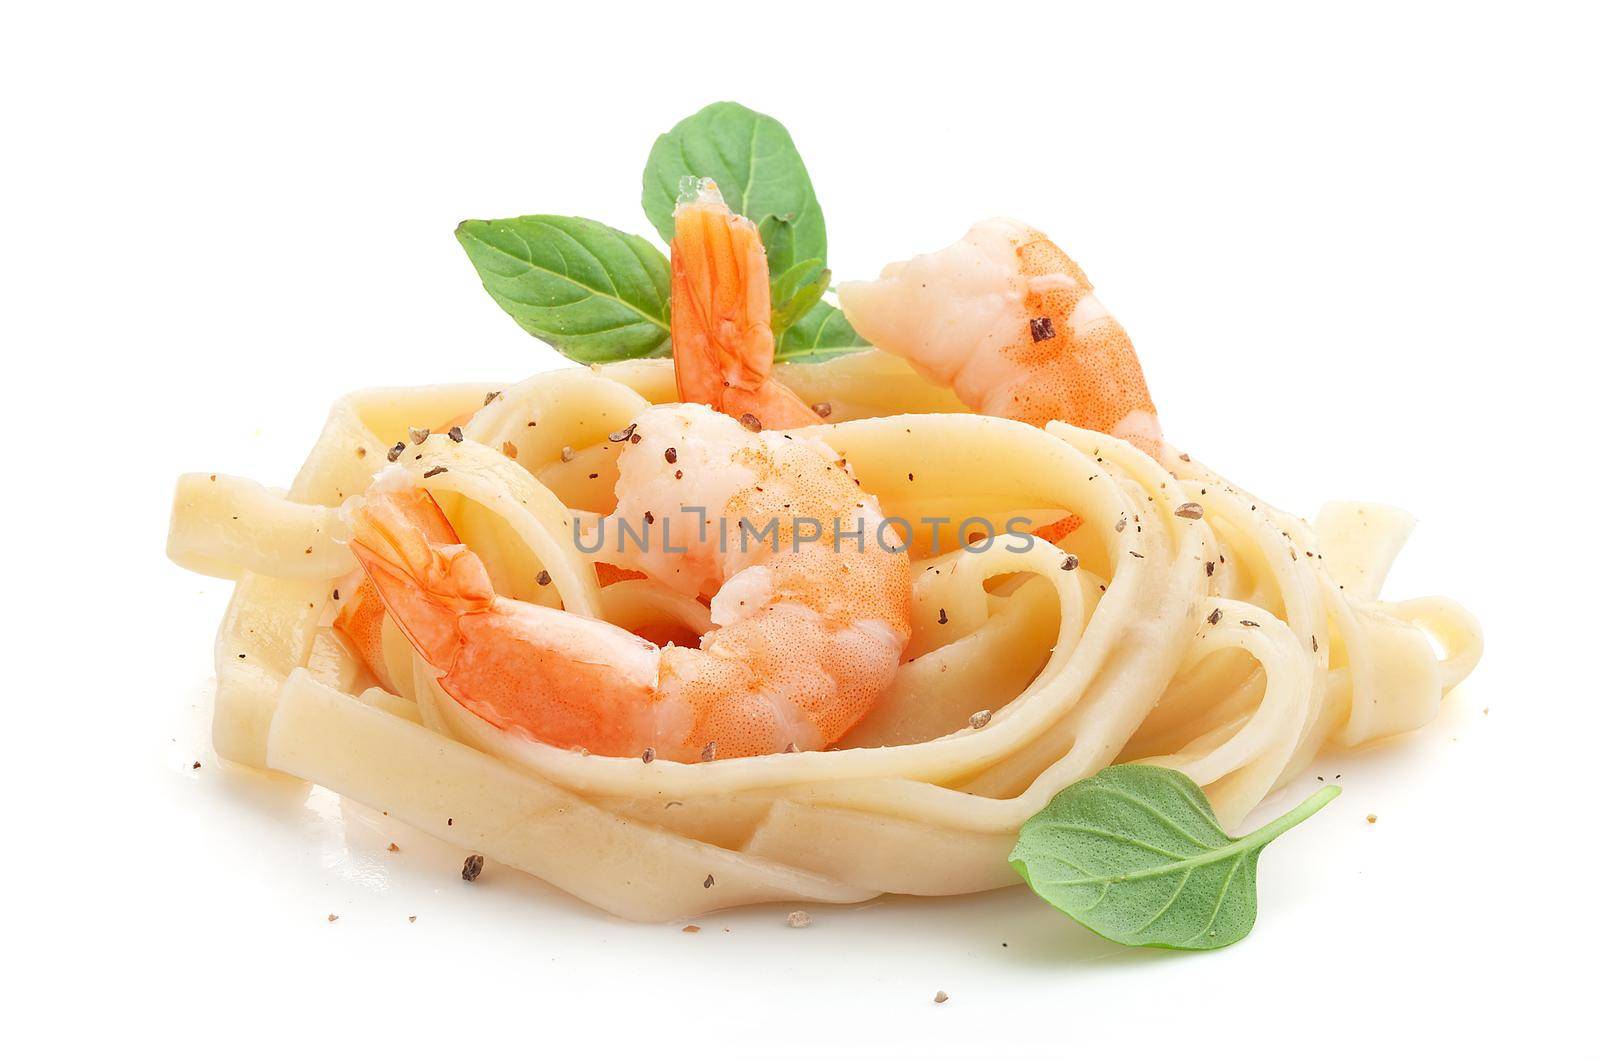 Boiled shrimps  with pasta by Angorius